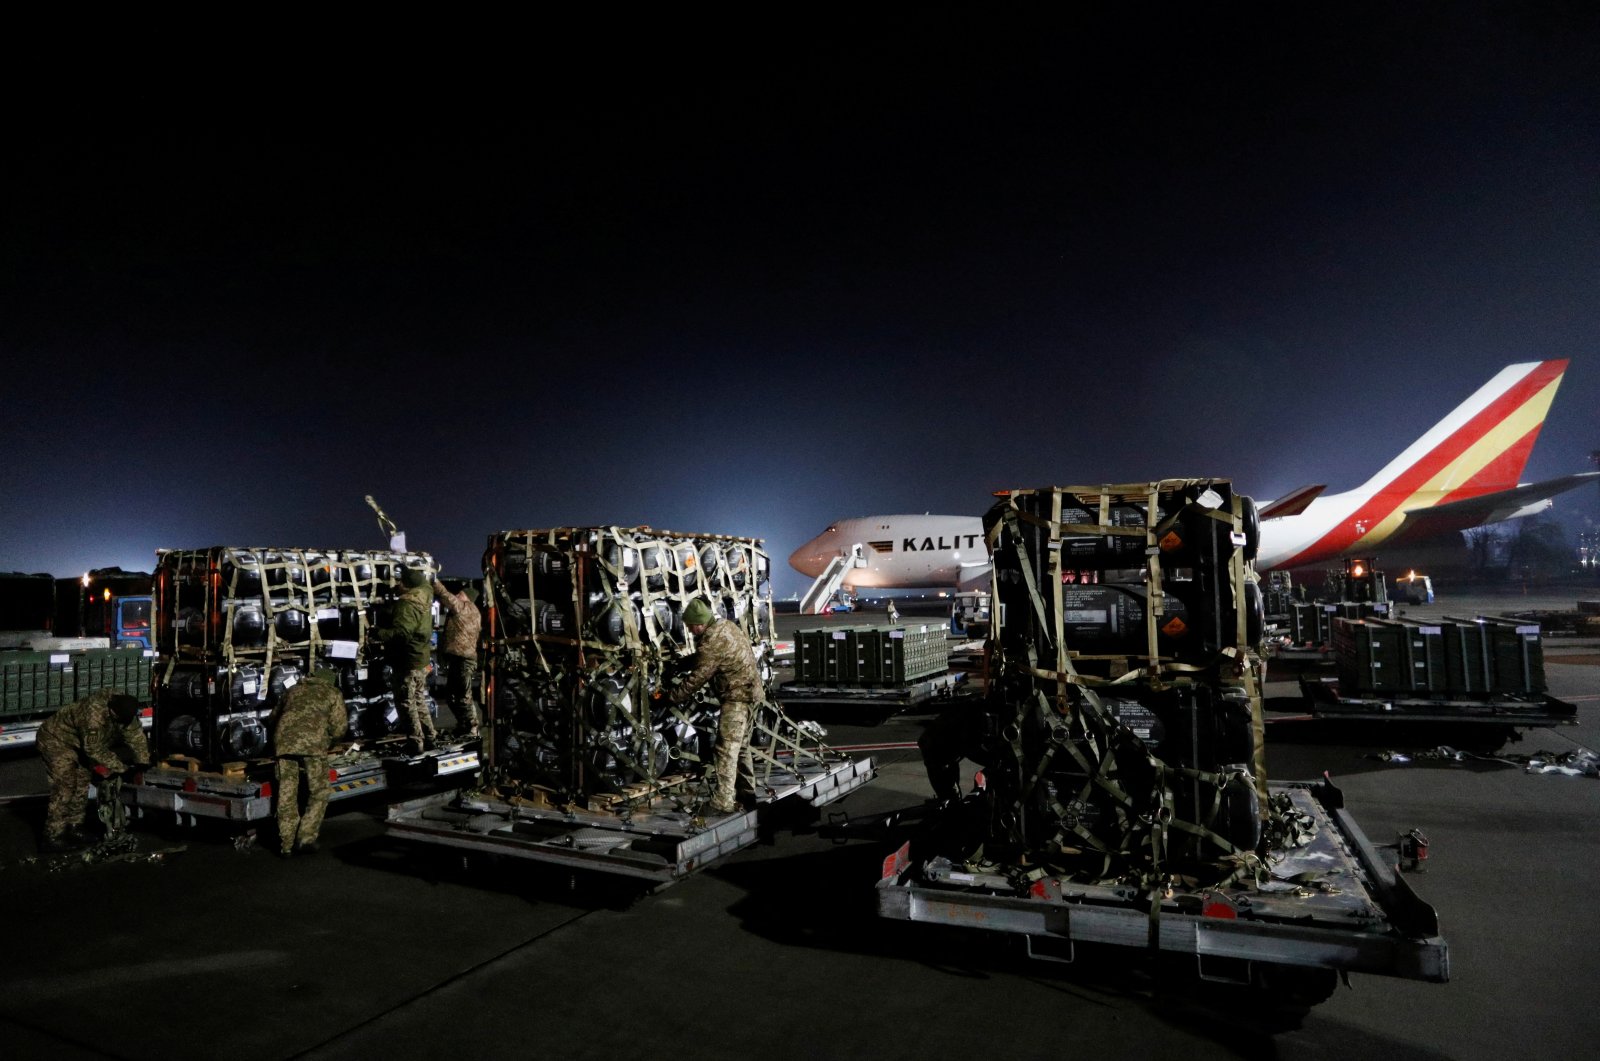 Ukrainian service members unpack Javelin anti-tank missiles, delivered by plane as part of the U.S. military support package for Ukraine, at the Boryspil International Airport outside Kyiv, Ukraine, on Feb. 10, 2022. (Reuters Photo)